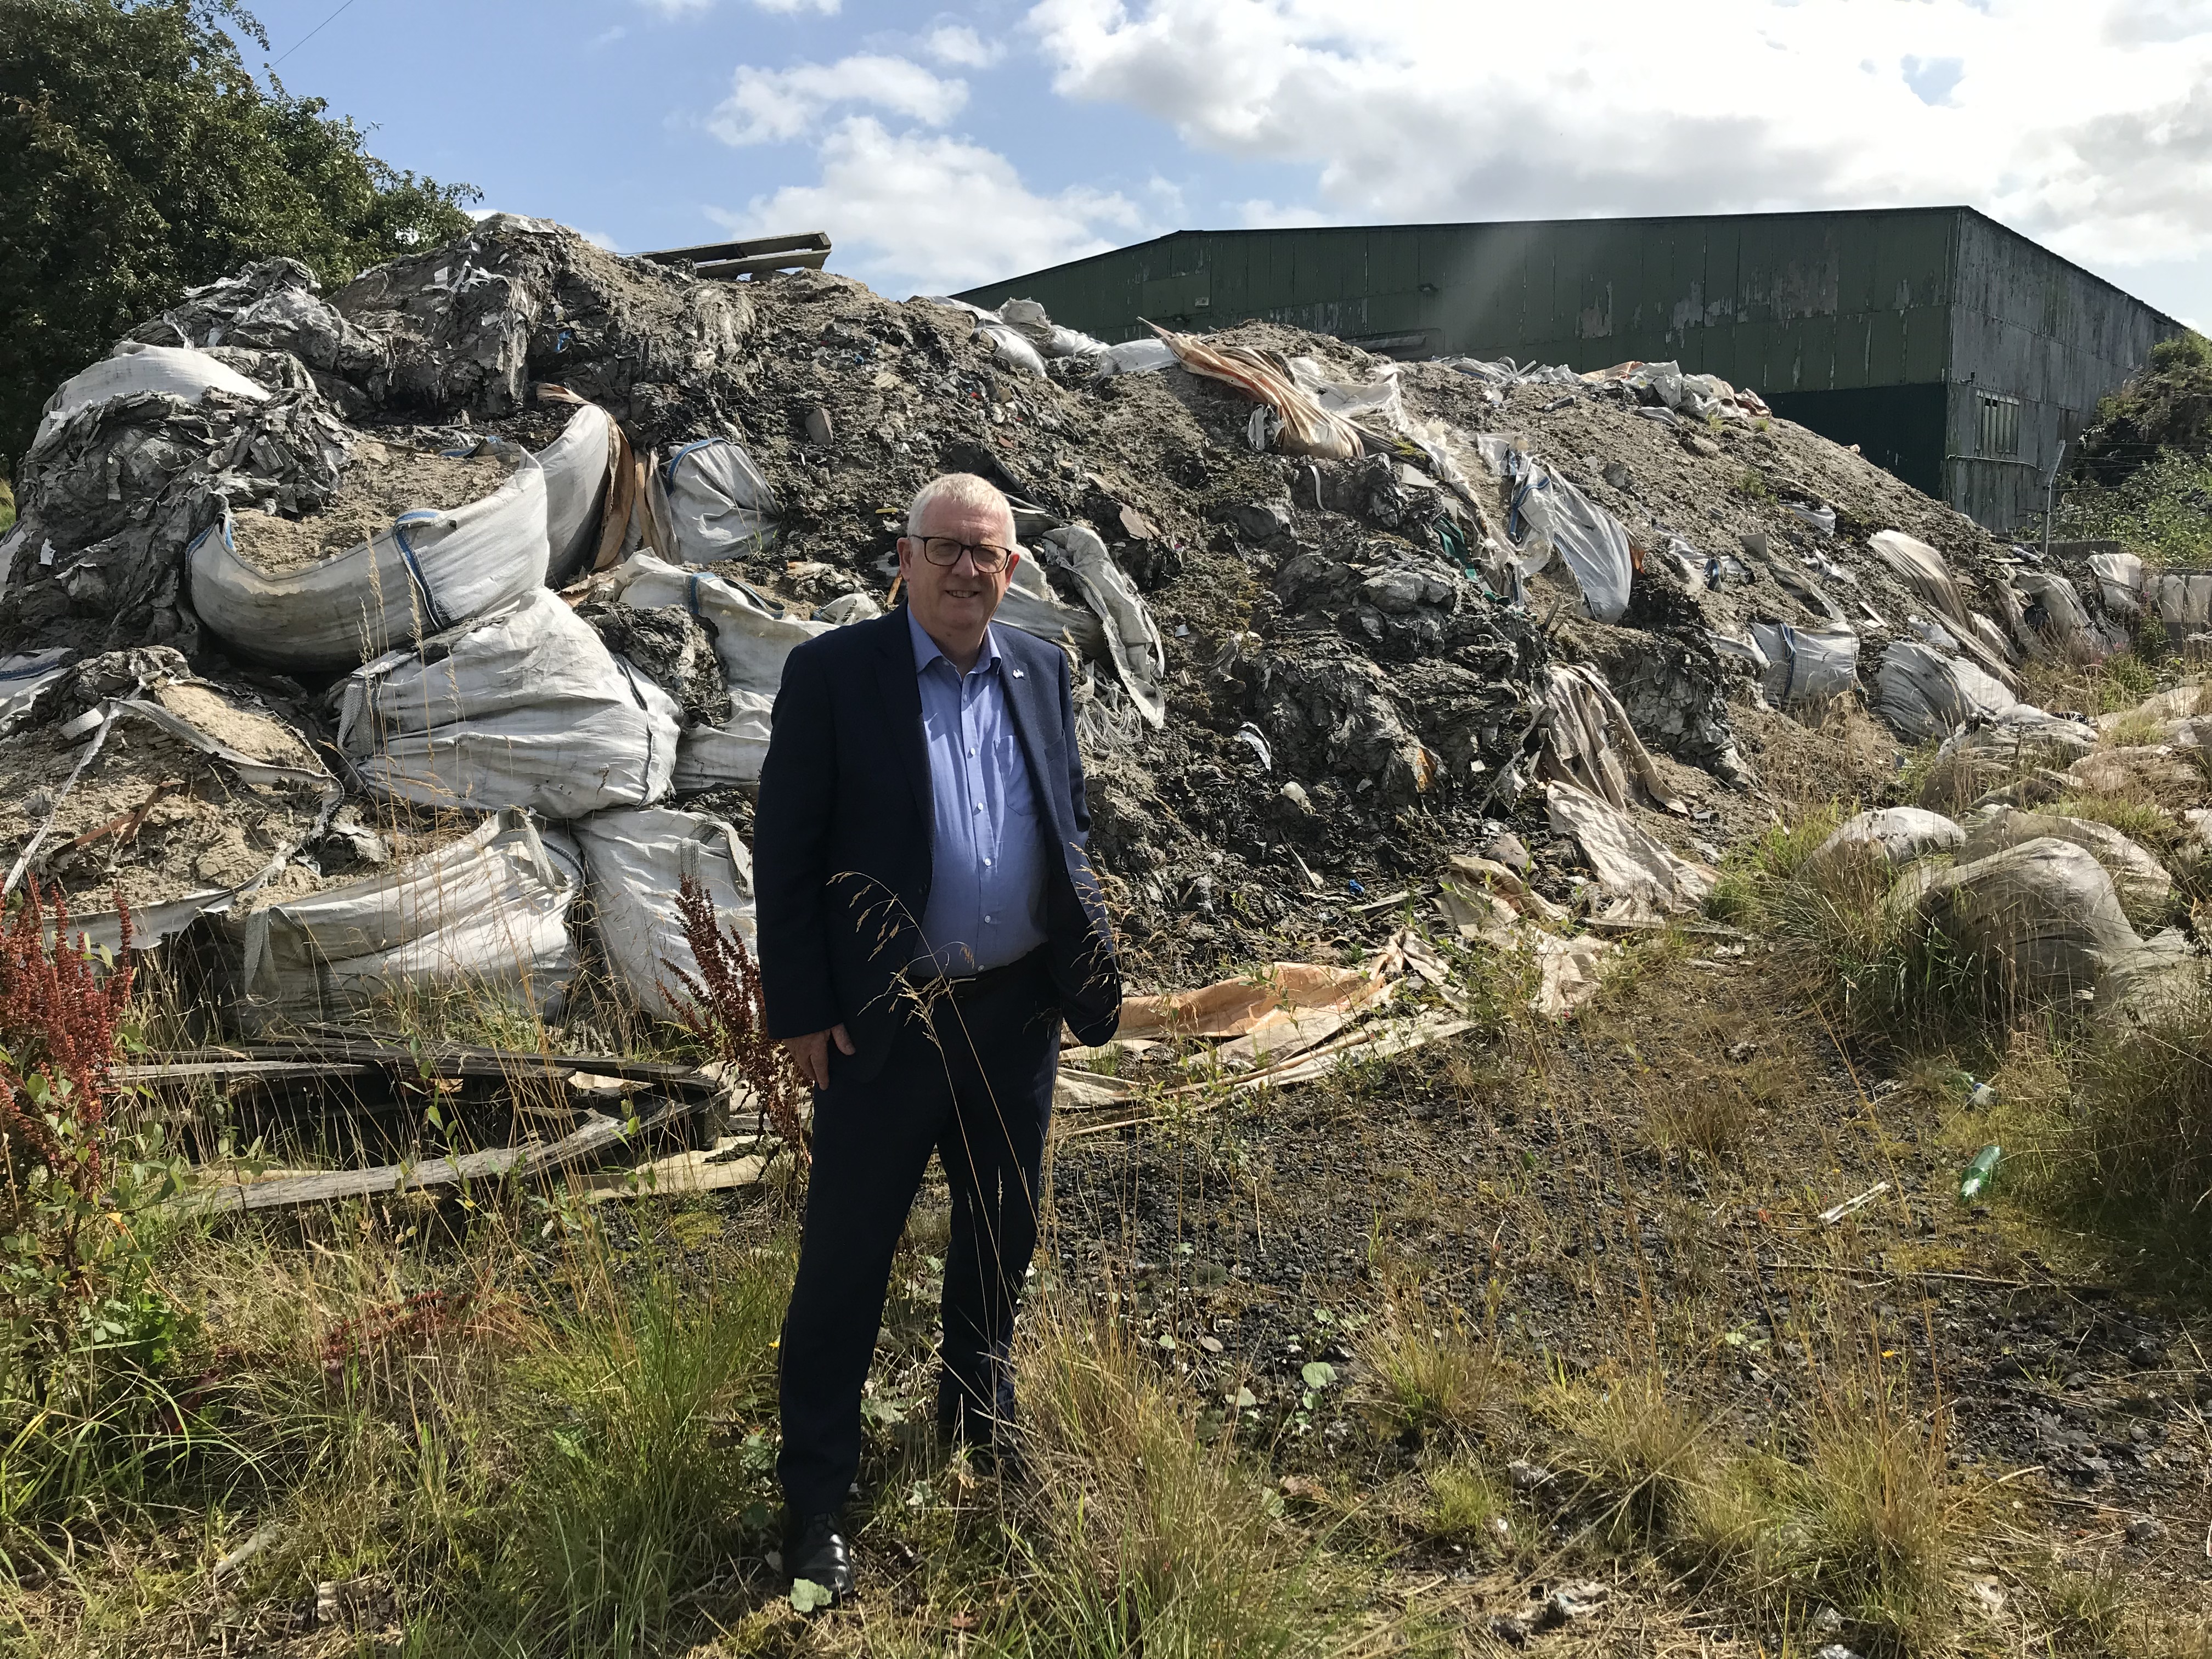 SNP MP Douglas Chapman has welcomed news that the waste will finally be removed.